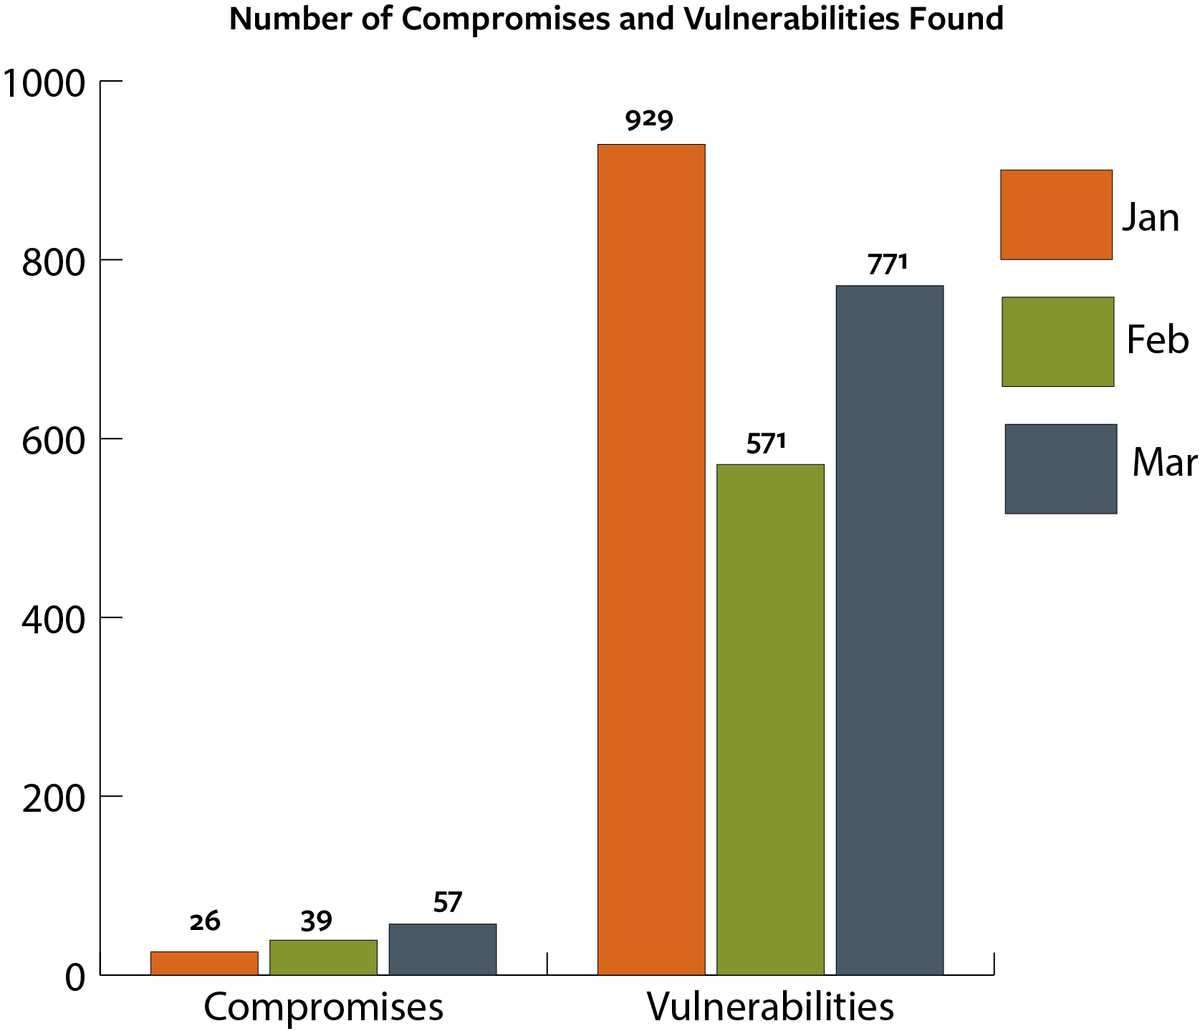 Q1 of 2022 Vulnerabilities and Compromises Graph